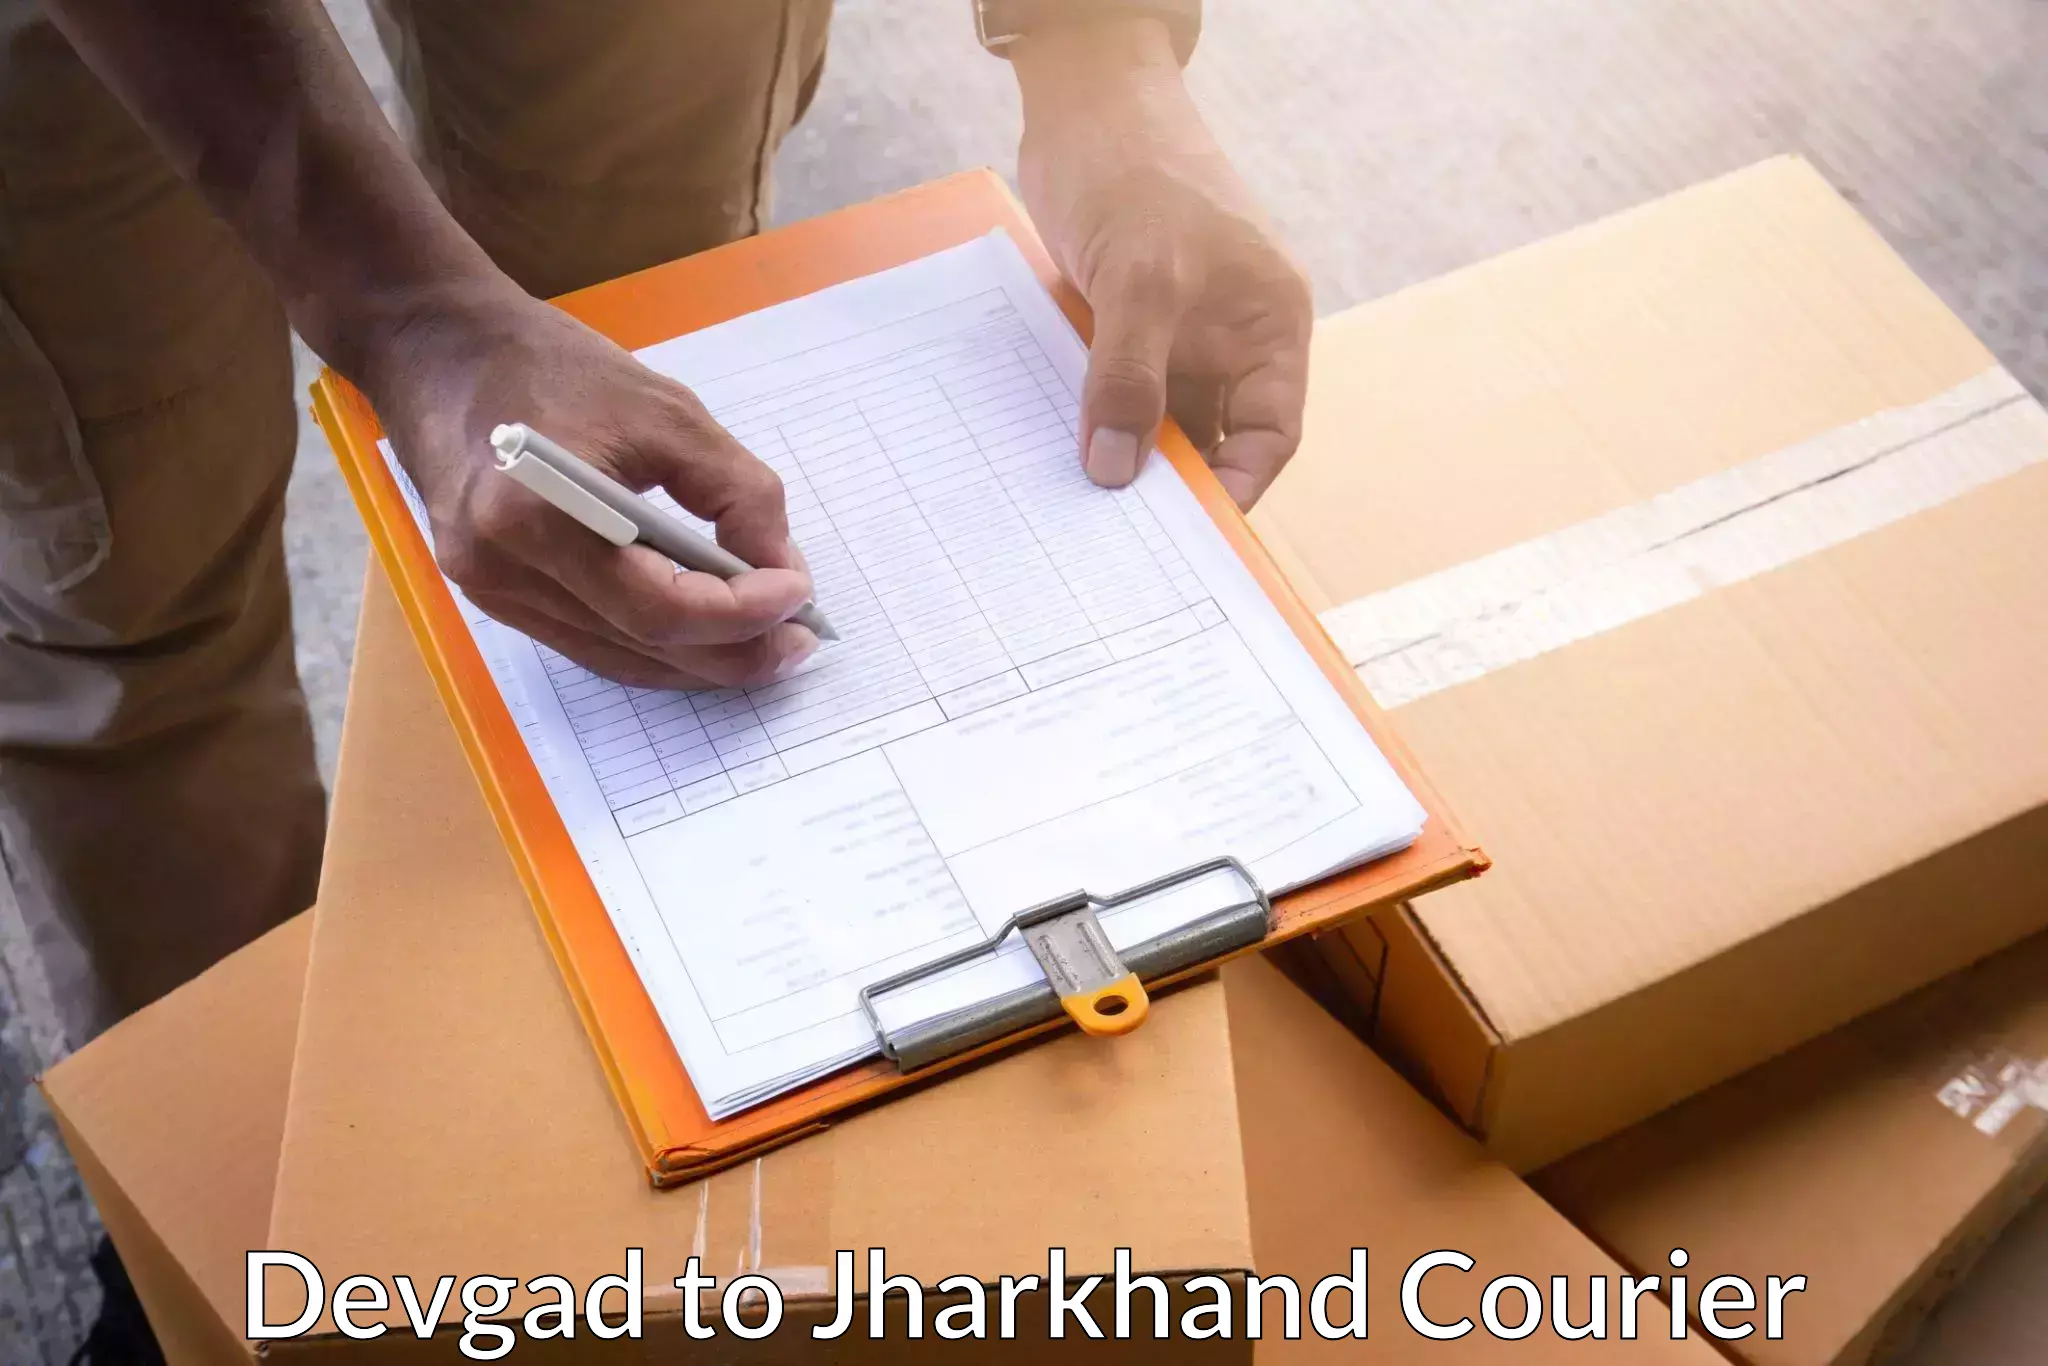 Specialized shipment handling Devgad to Jharkhand